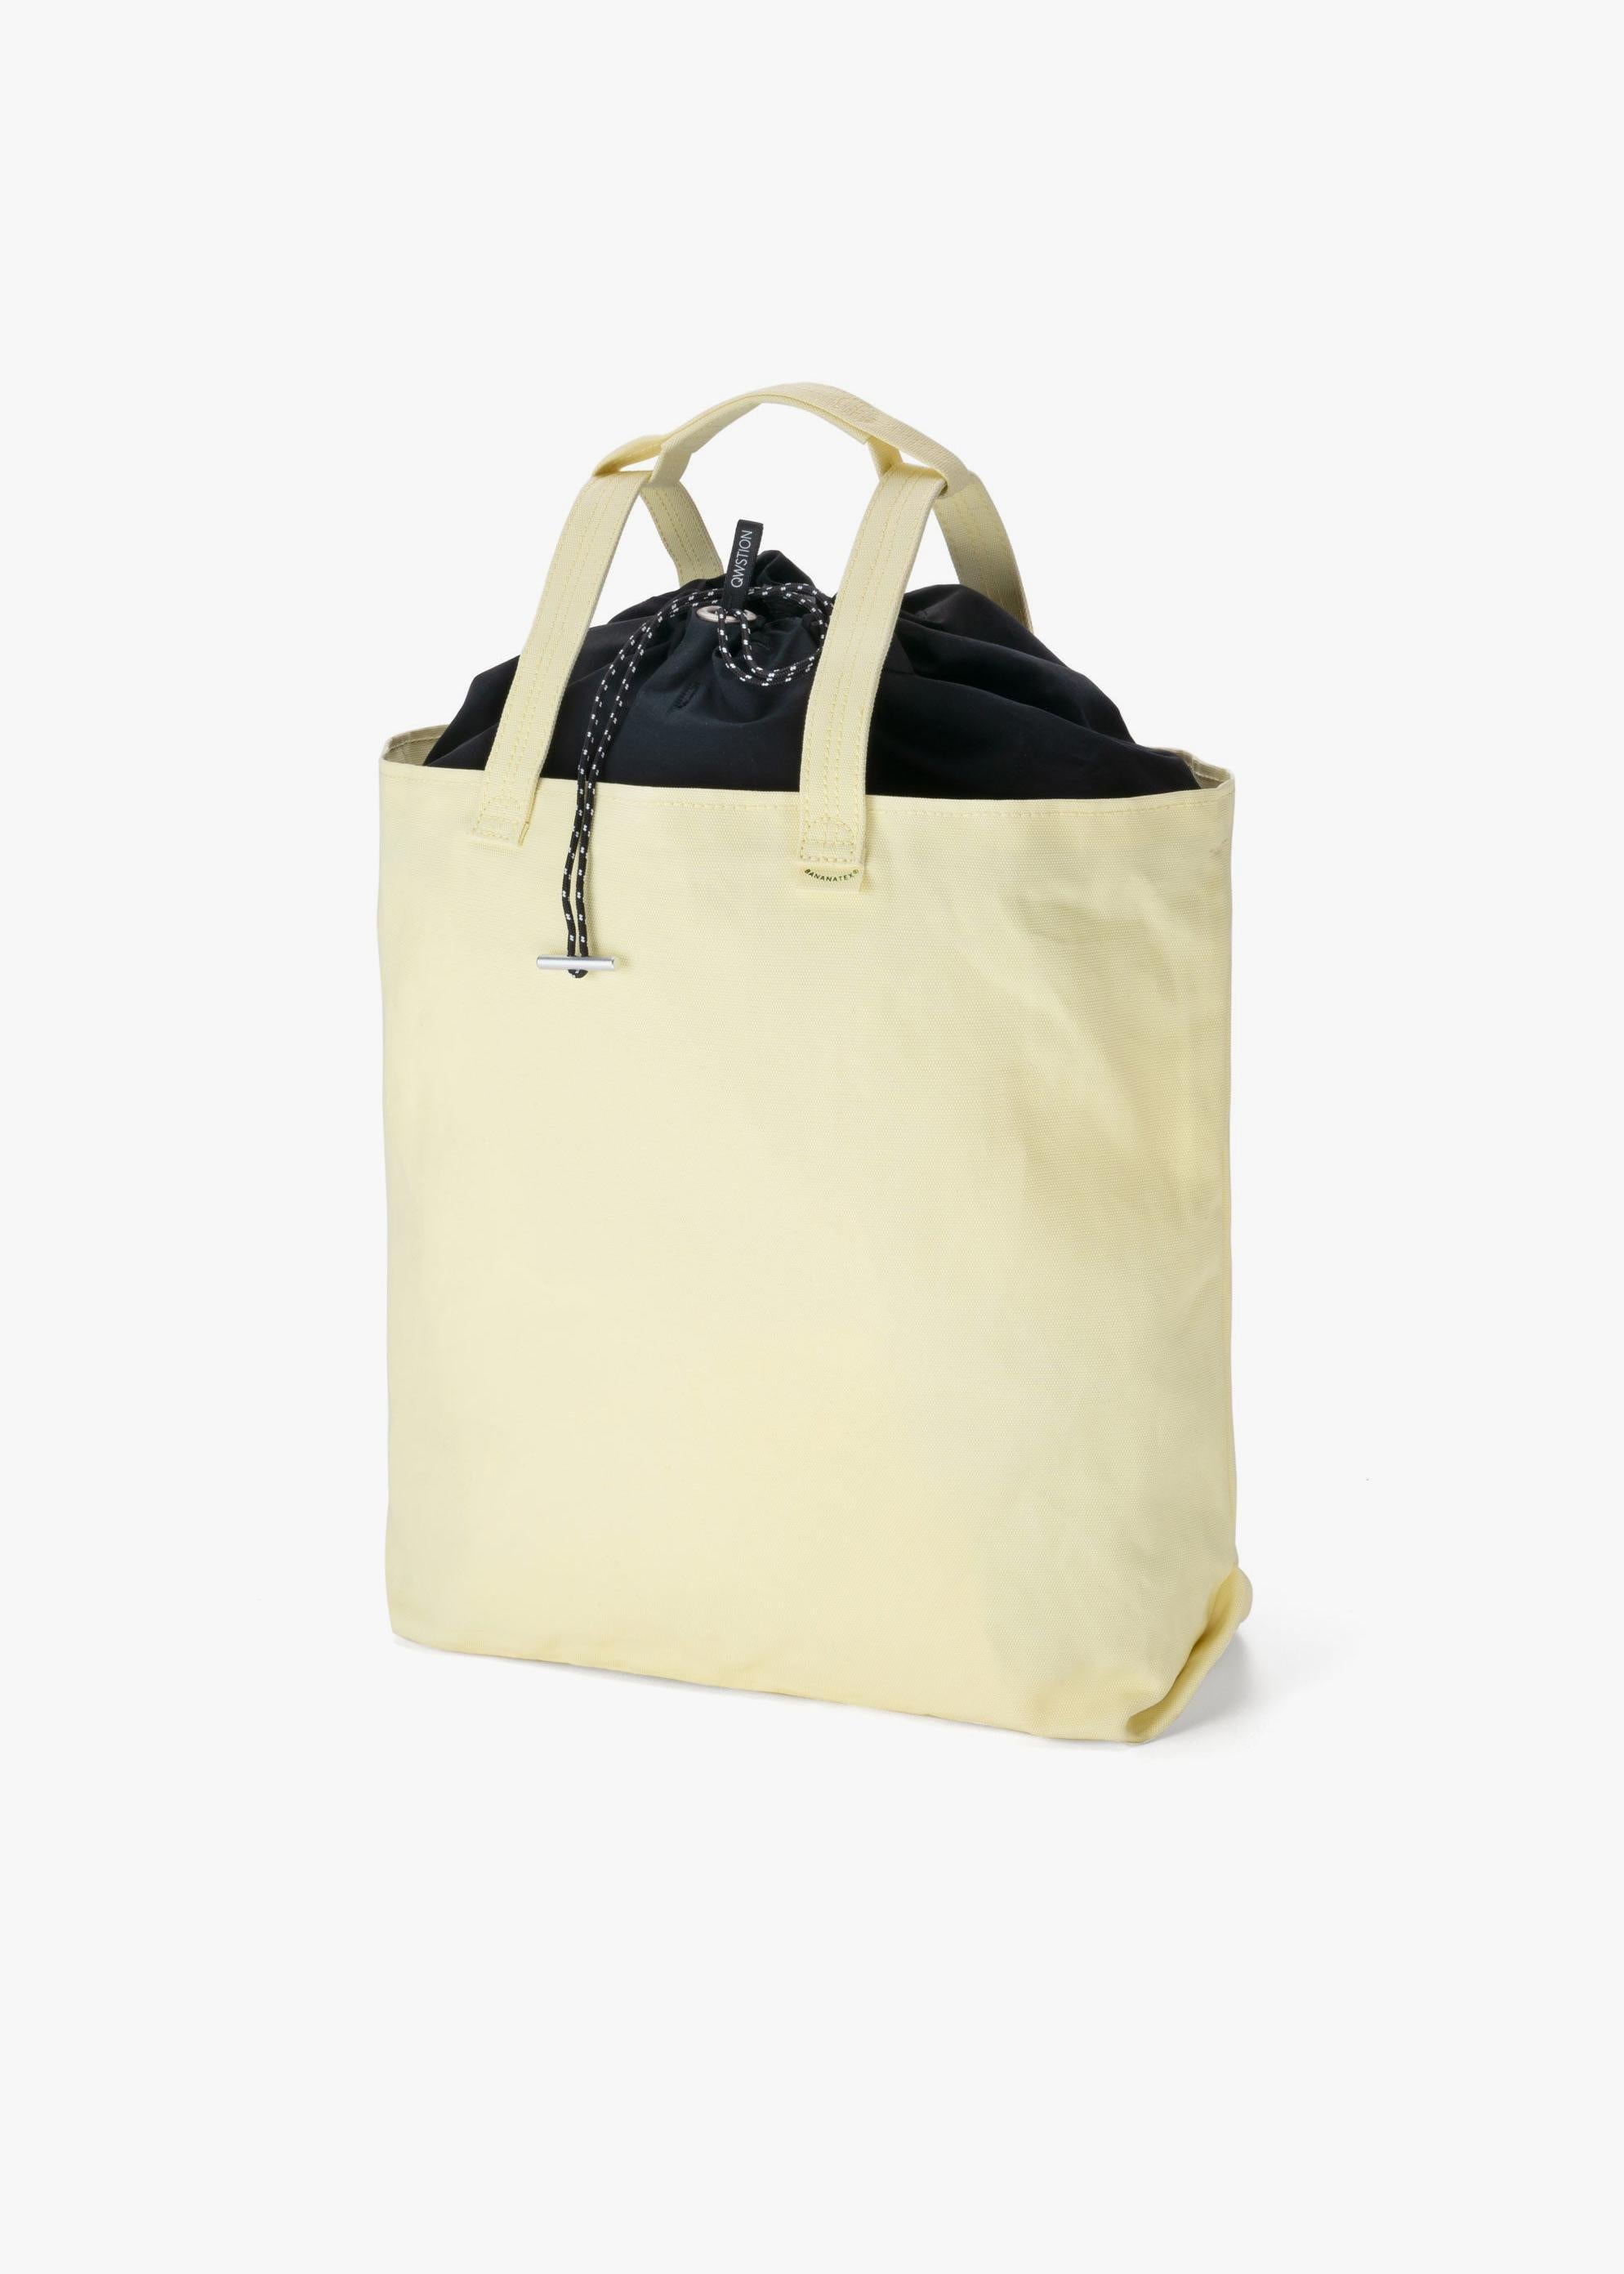 Bananatex Tote Bag Large – Pale Yellow / Raven - QWSTION